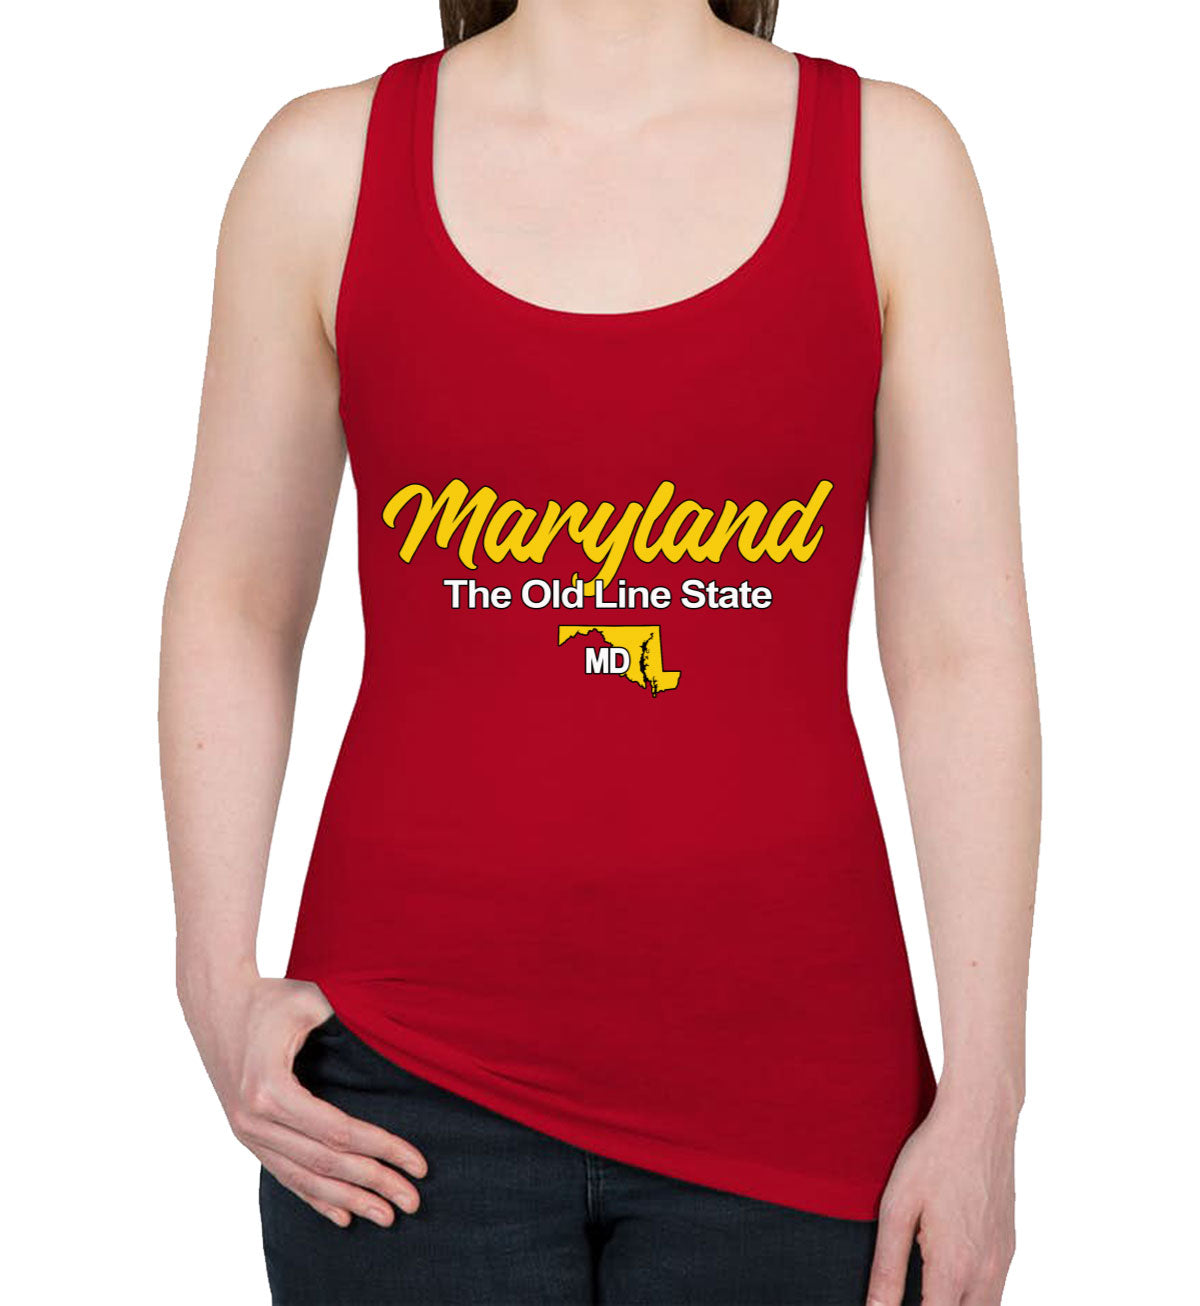 Maryland The Old Line State Women's Racerback Tank Top